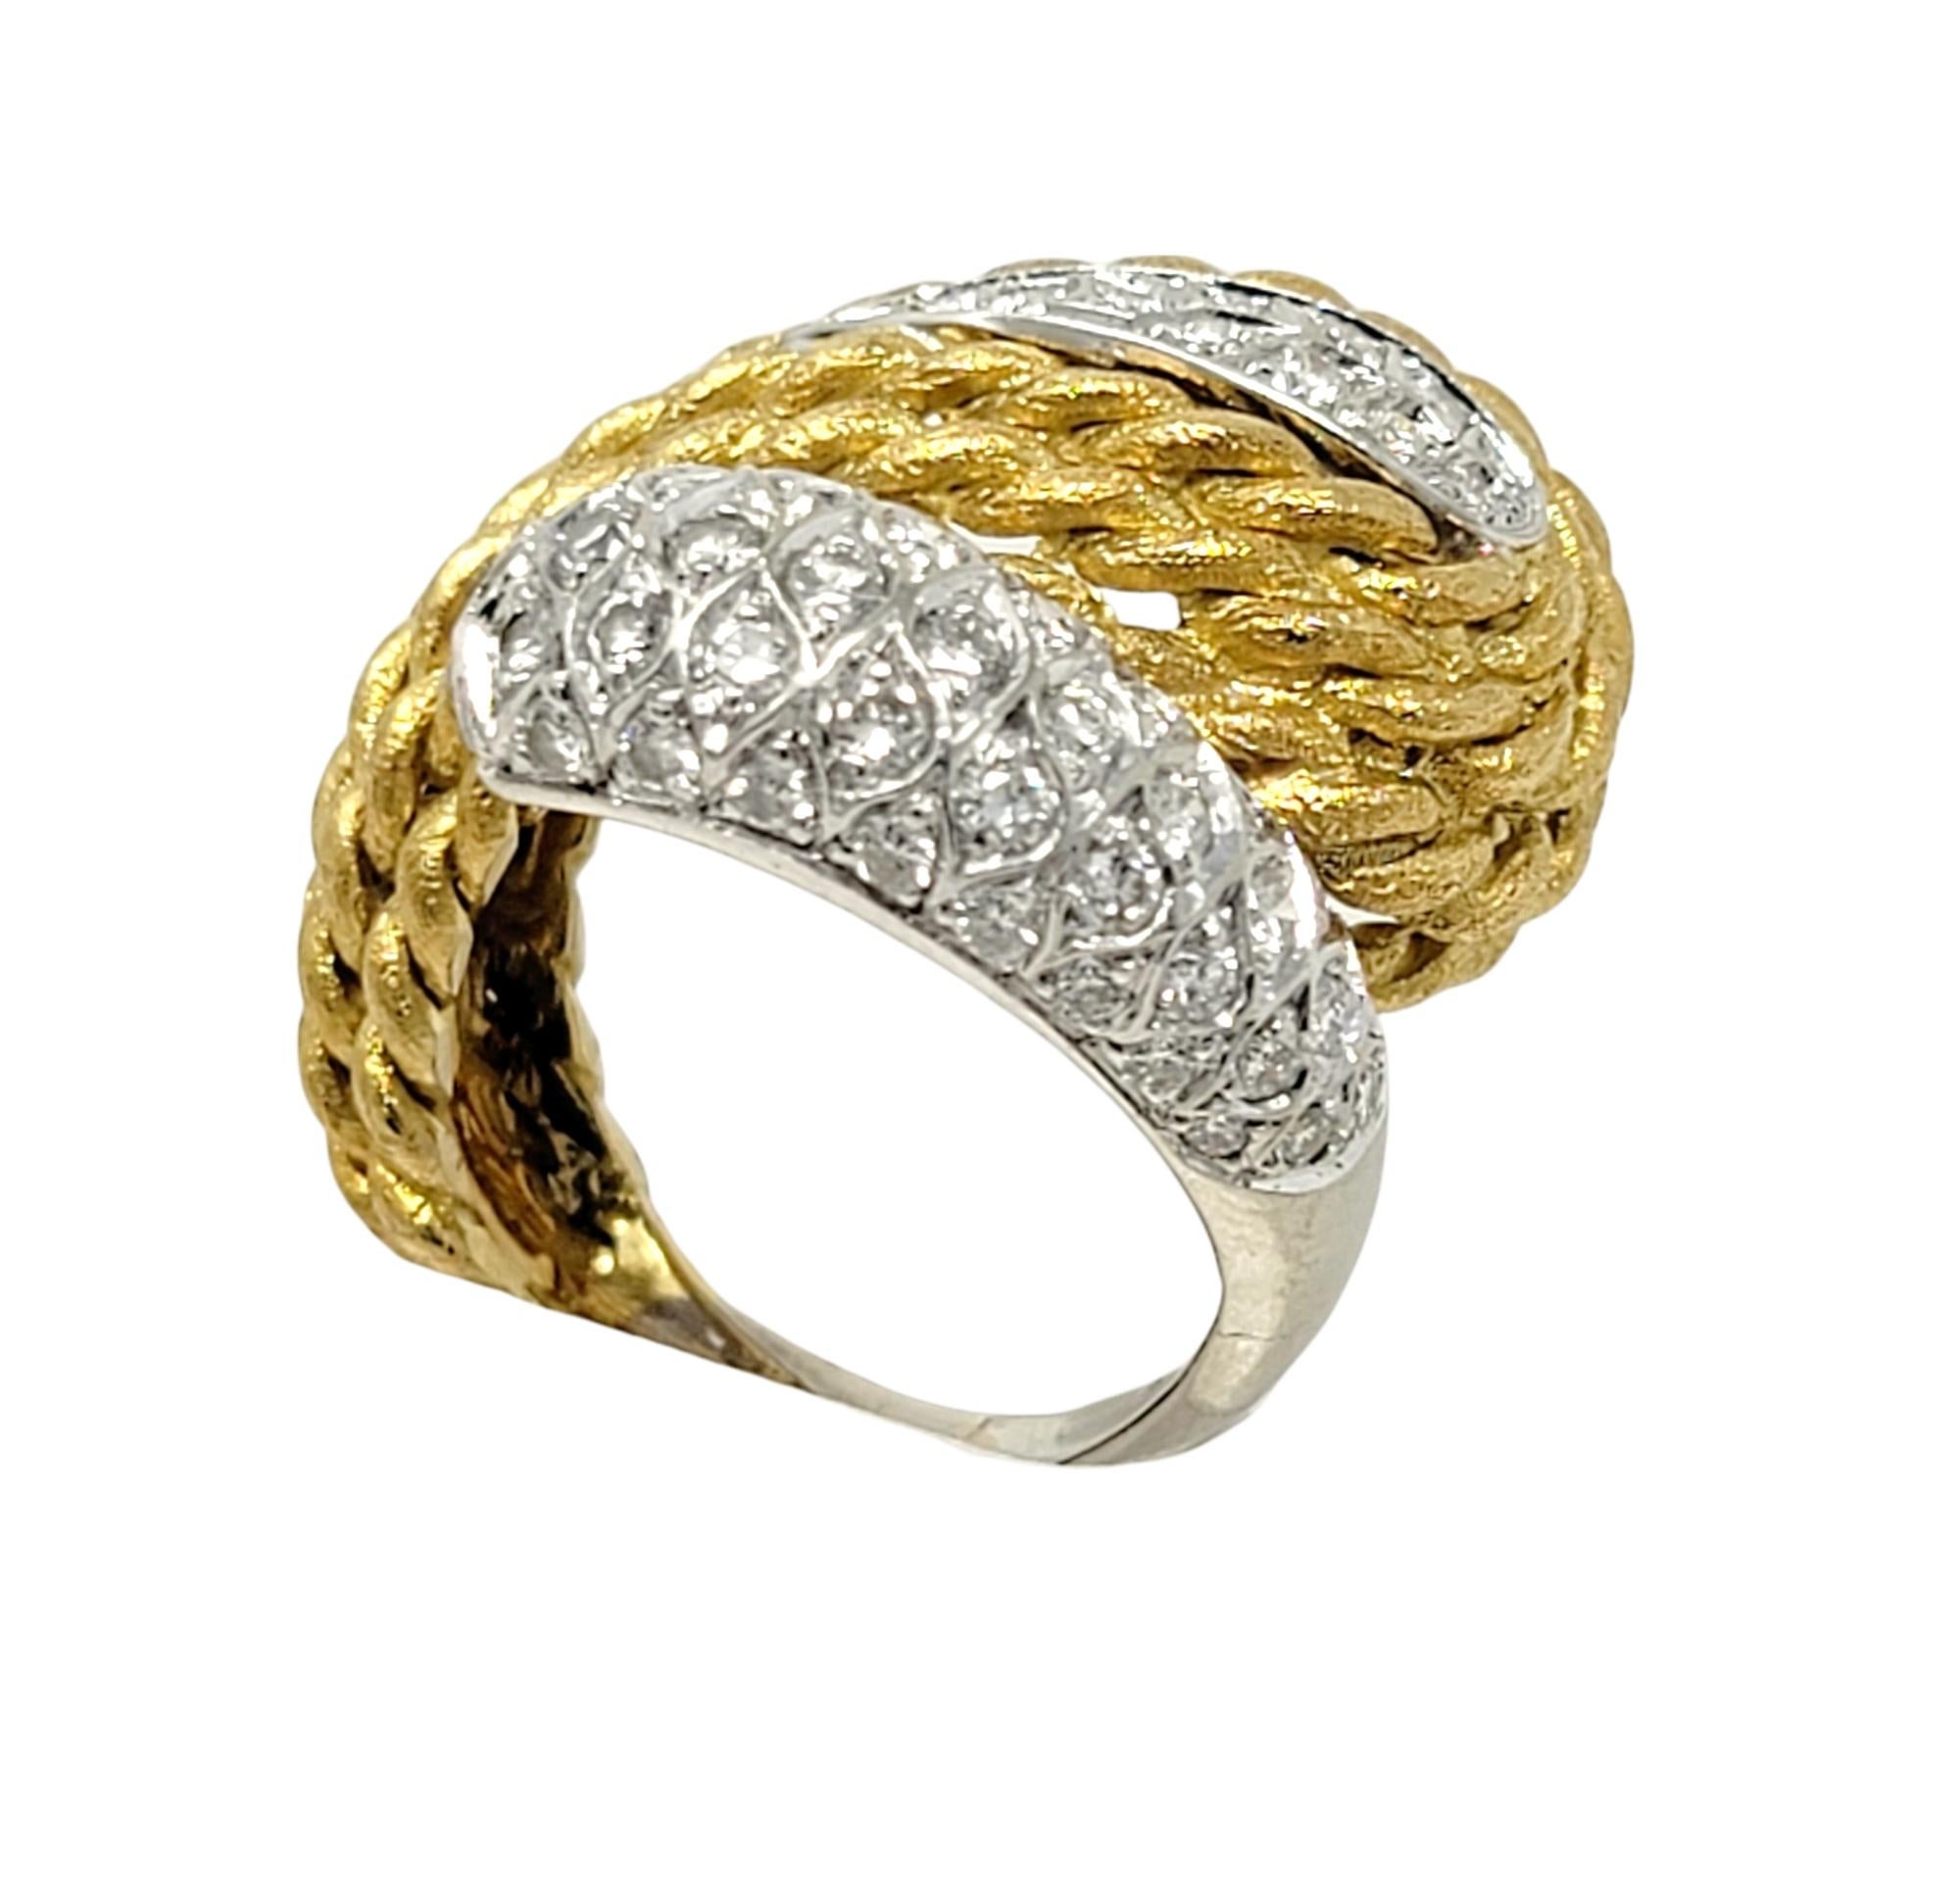 18 Karat Gold Two Tone Rope Detail Wrap Style Dome Ring with Diamond Accents In Good Condition For Sale In Scottsdale, AZ